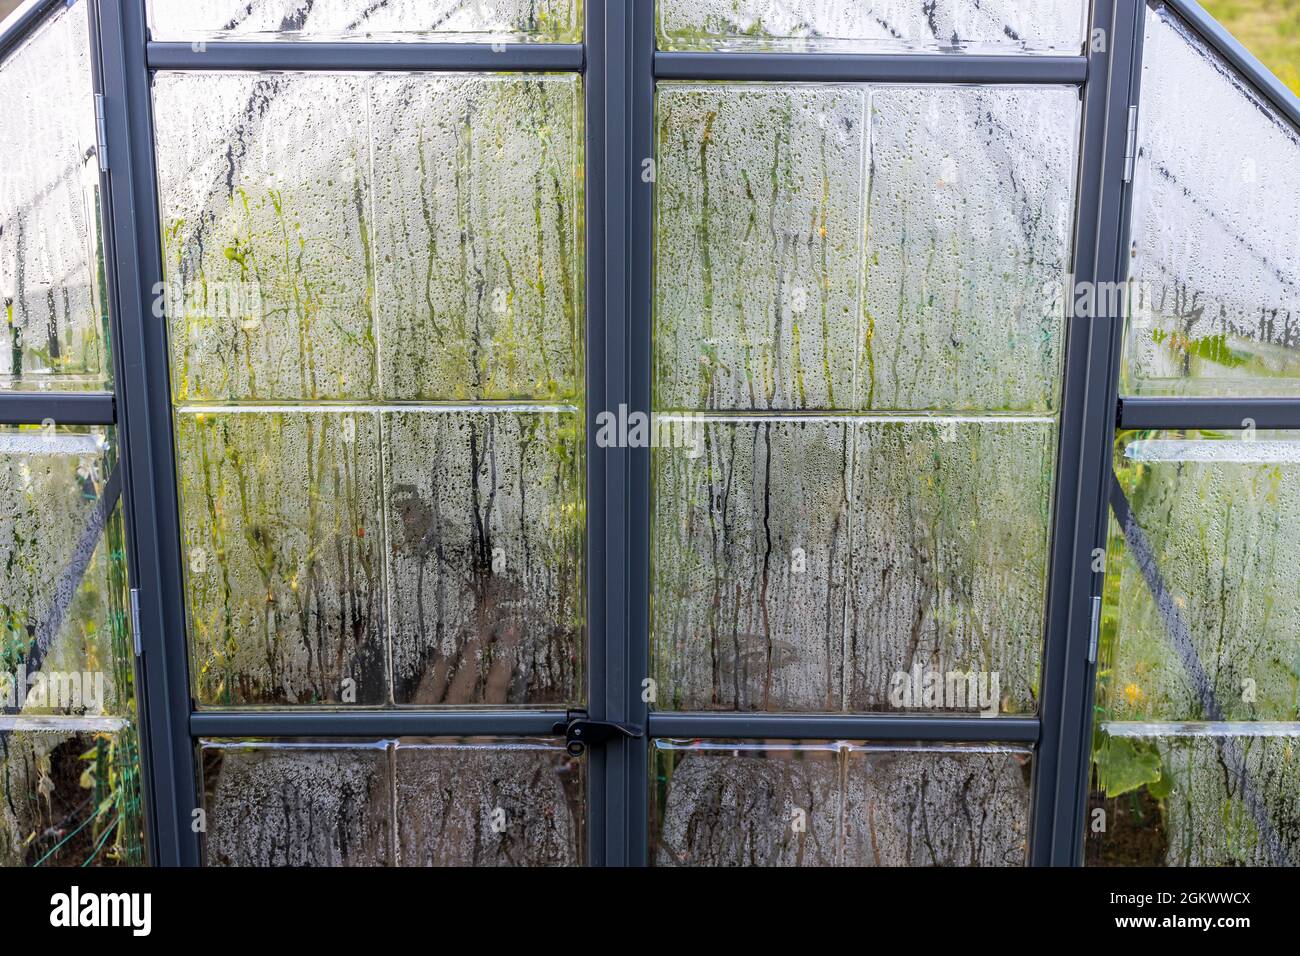 CONDENSATION ON WINDOWS AND WALLS 